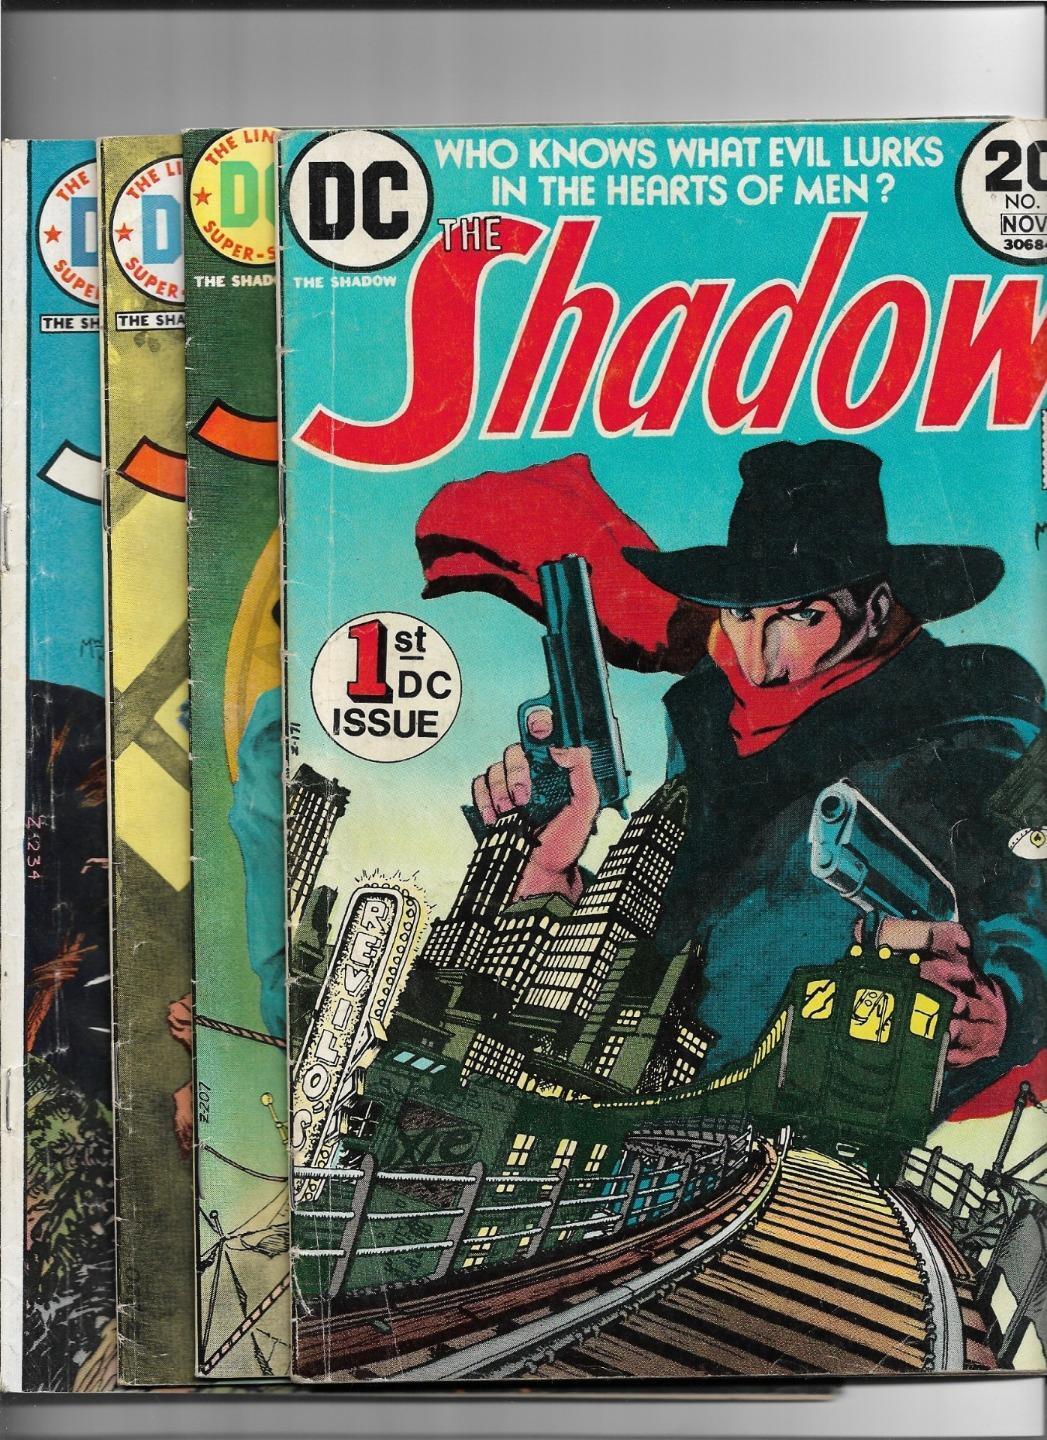 THE SHADOW #1 #2 #3 #4 1973/1974 VERY GOOD 4.0 4693